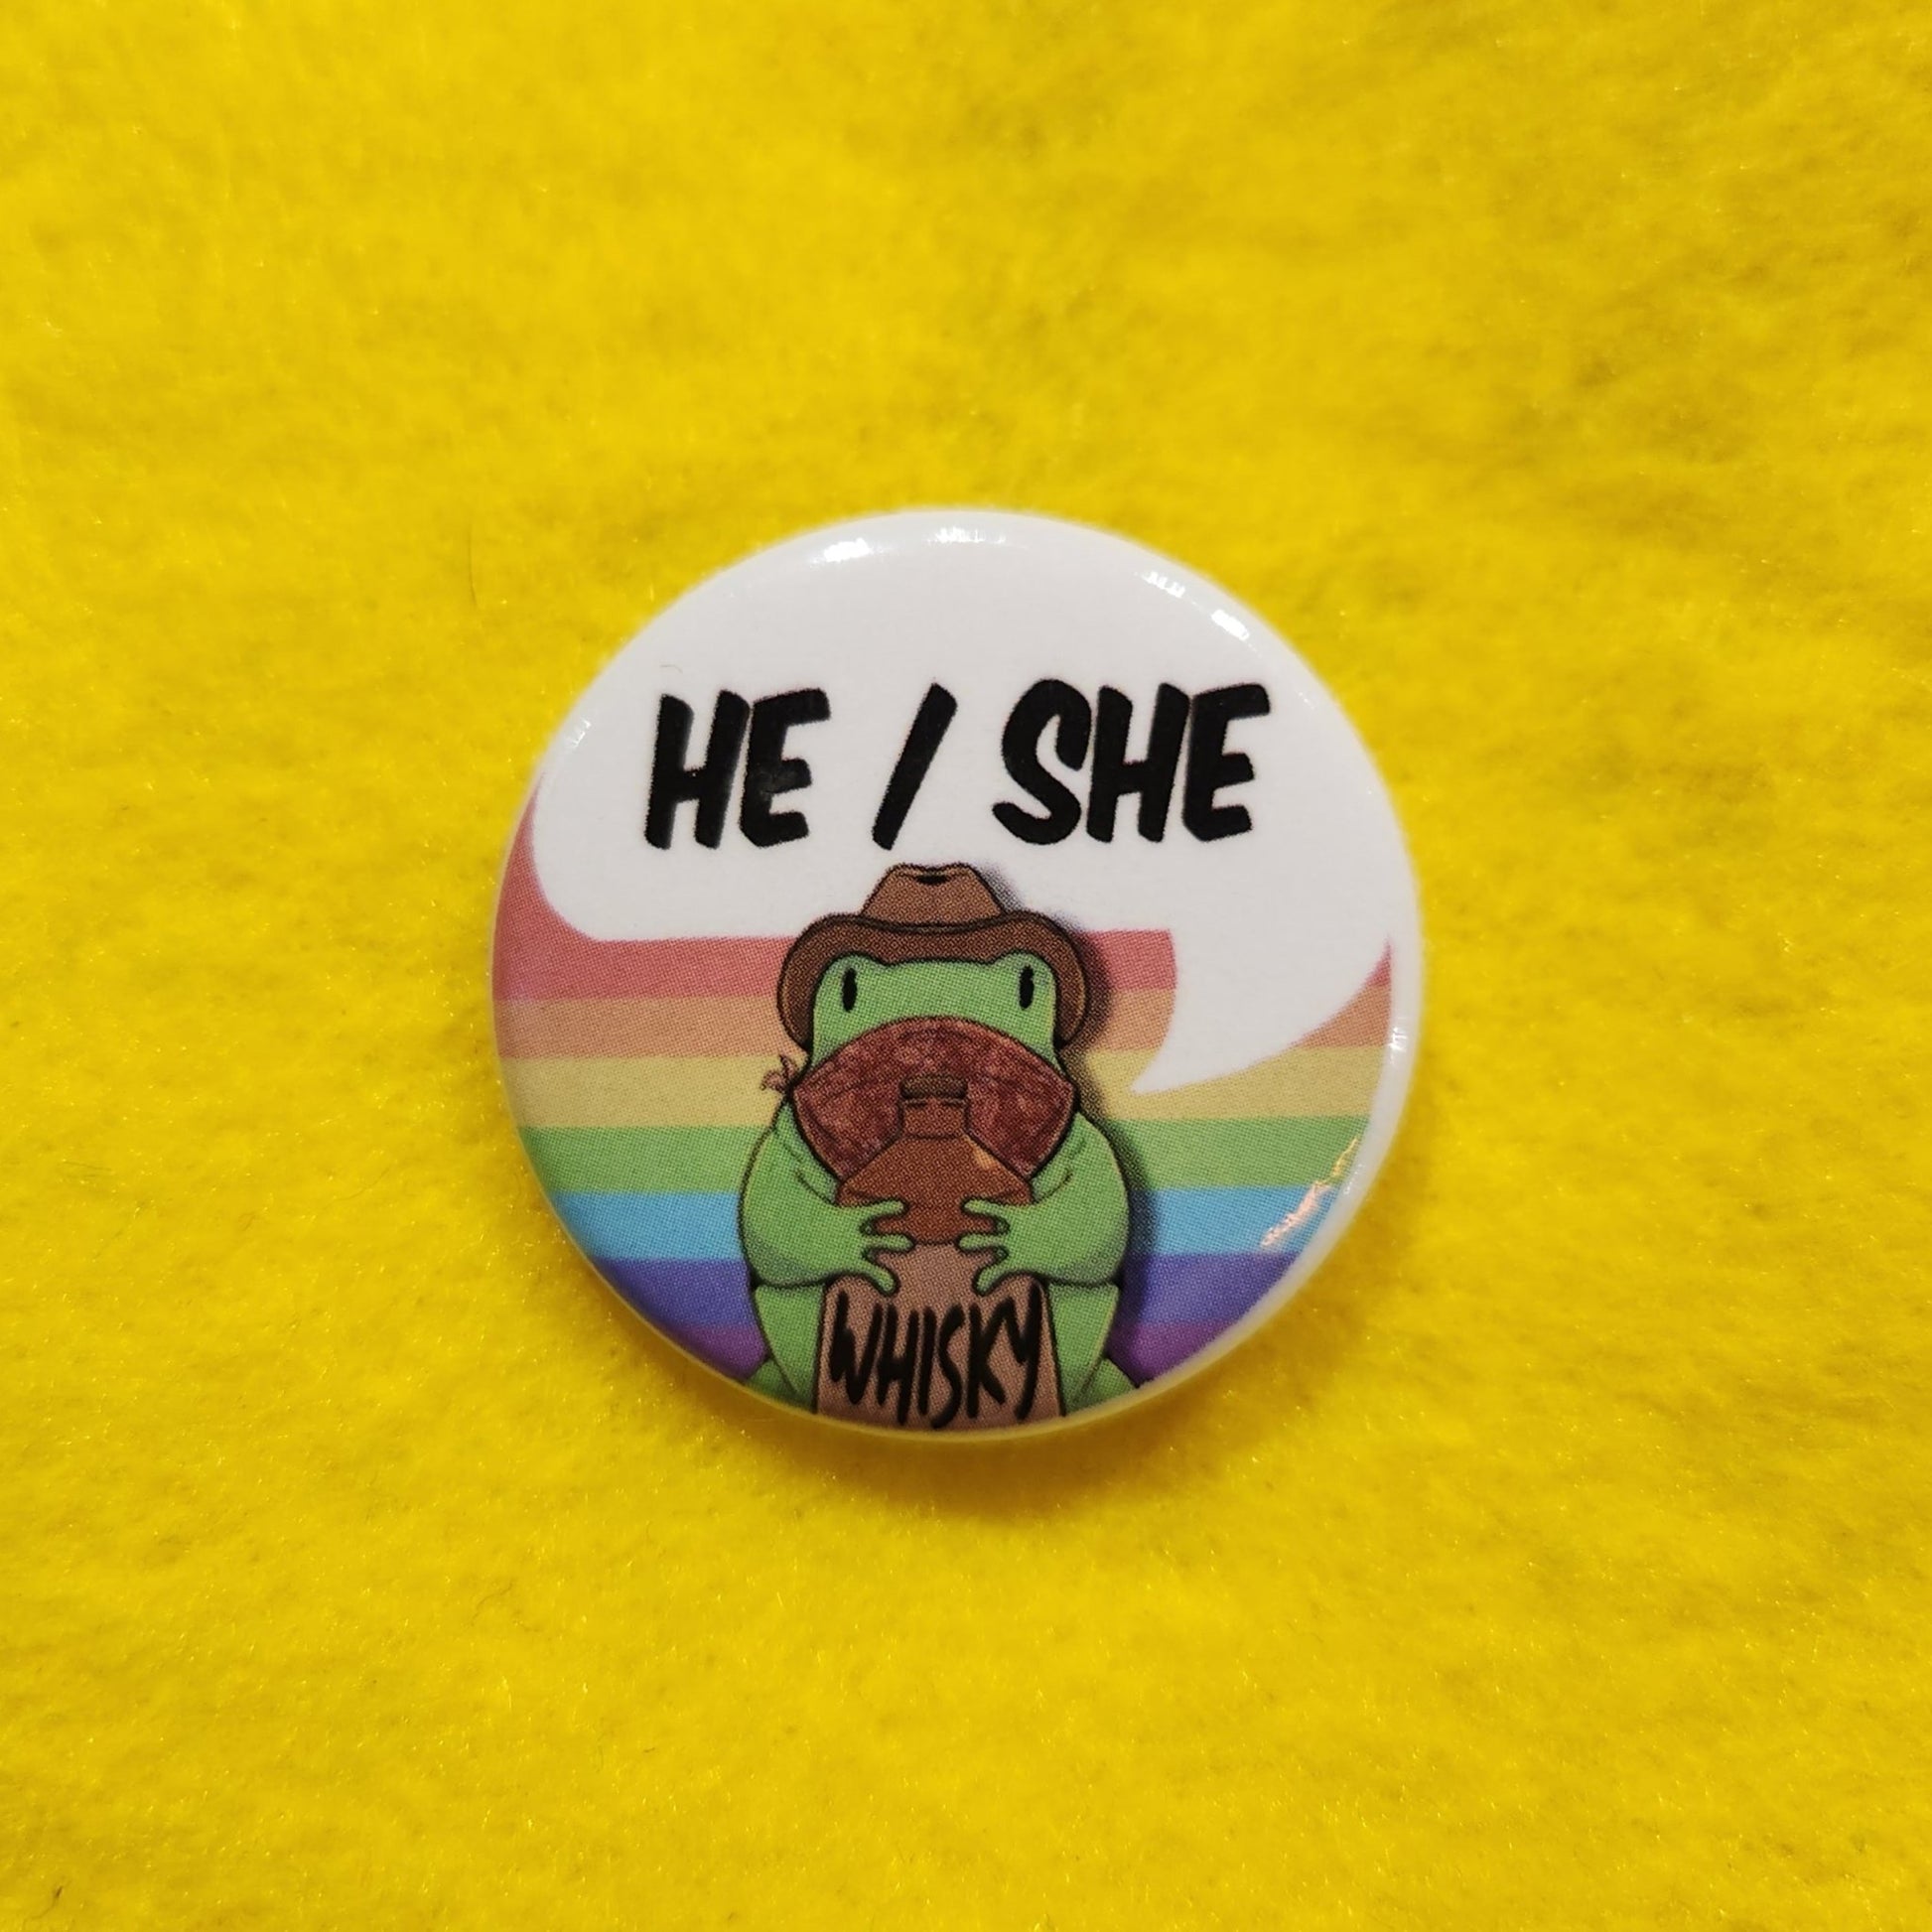 Whisky Frog Pronoun Button | HE/SHE | 1.25" - Deviantkreations